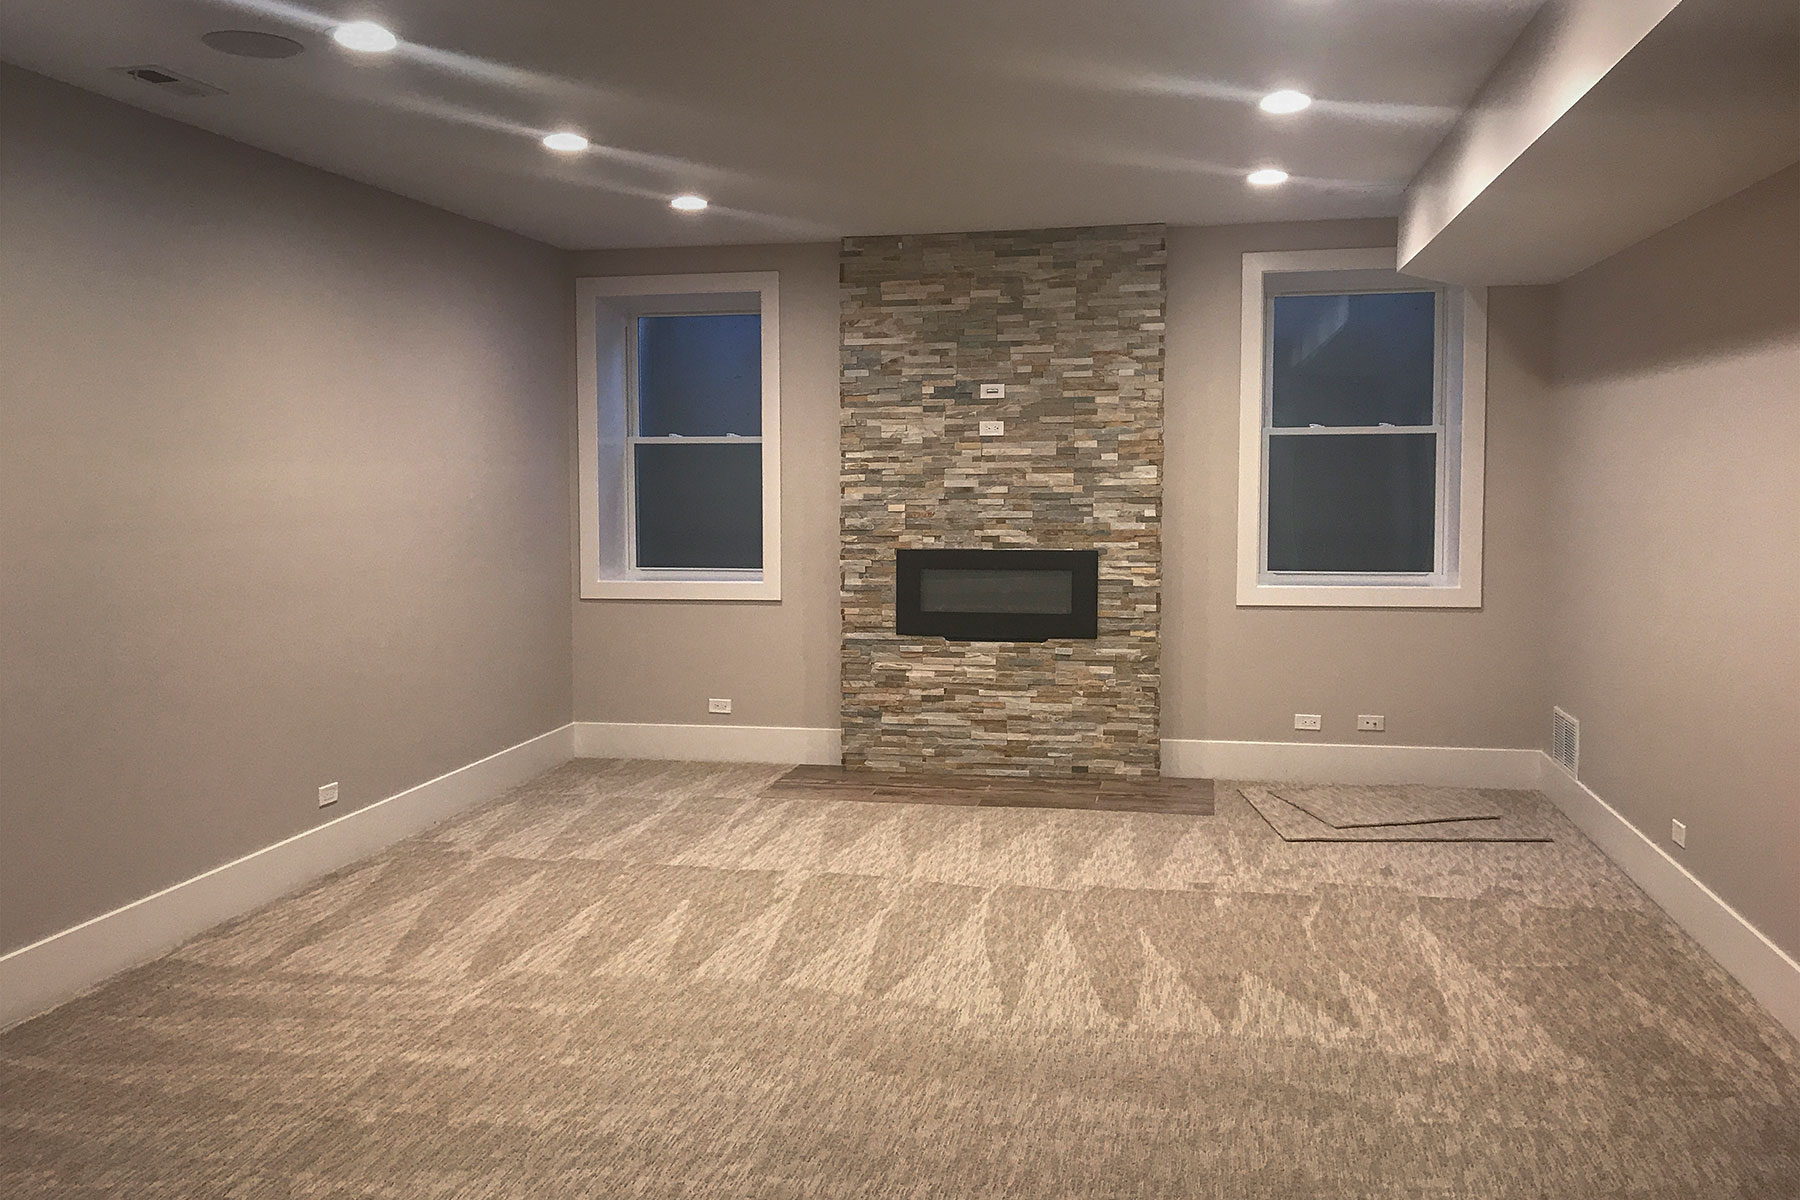 Basement Family Room with Fireplace - Custom Home, Echo Lane, Glenview, IL Custom Home. America's Custom Home Builders: New Construction, Remodeling, Restoration Services. Residential and Commercial.